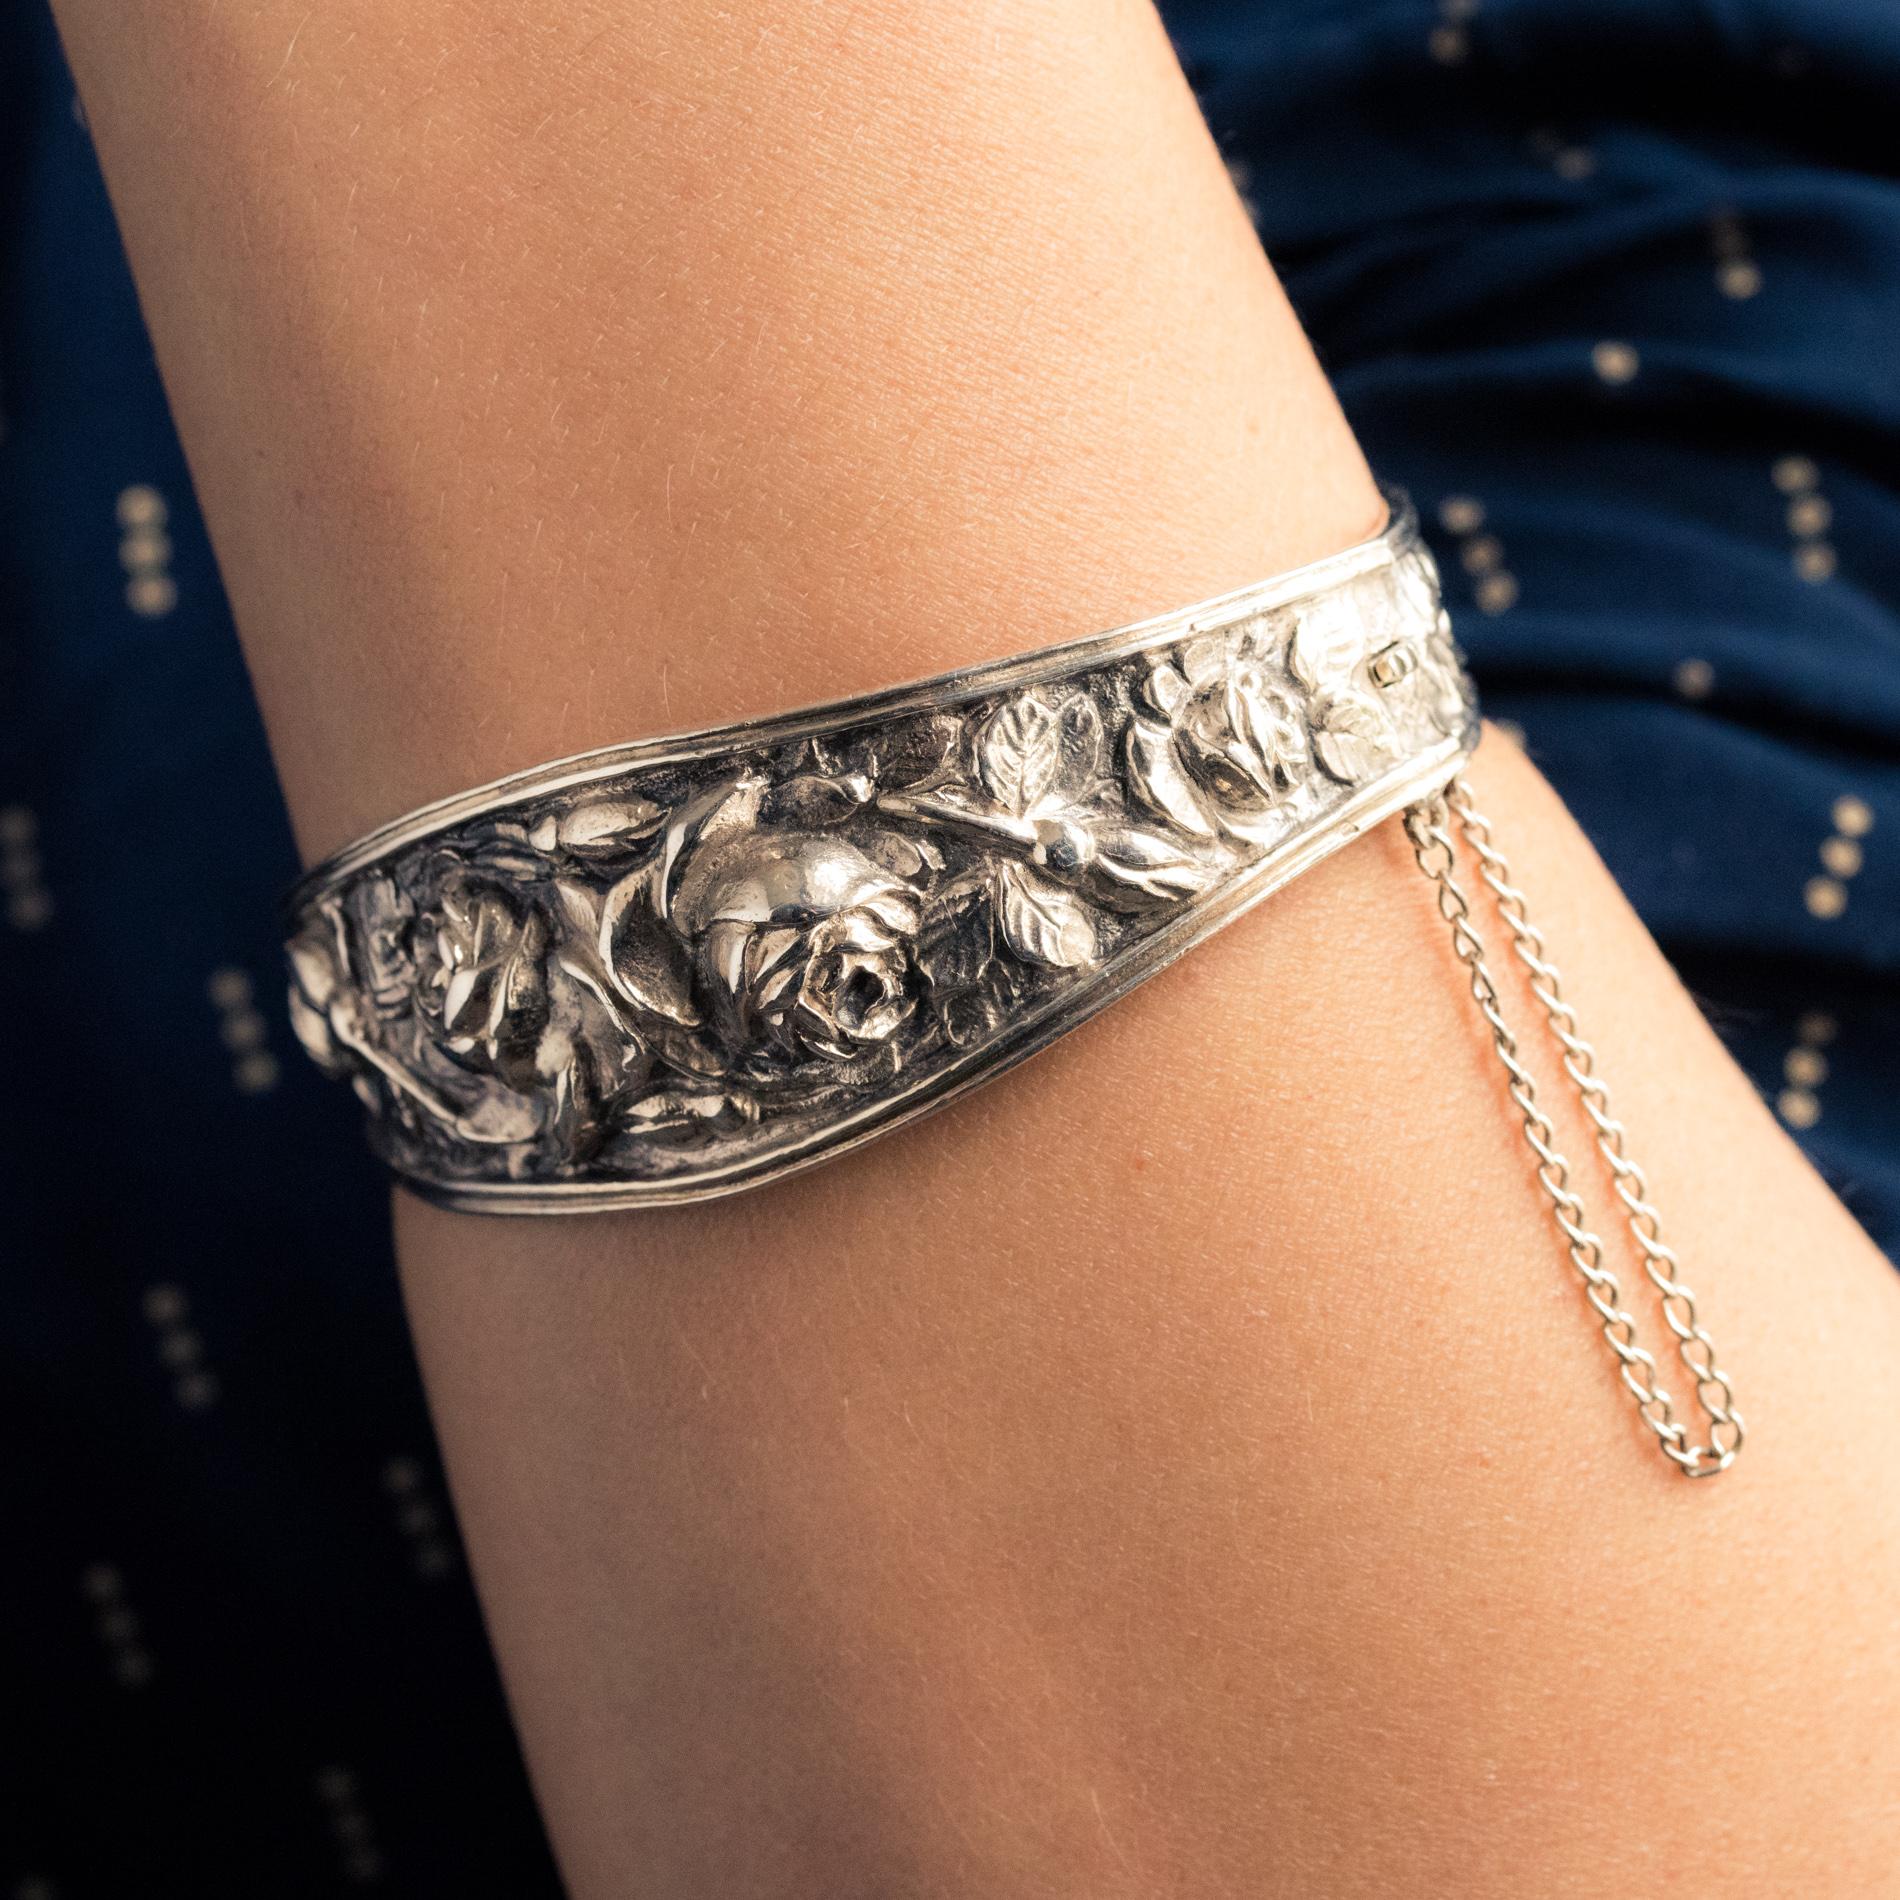 Bracalet in silver, boar's head hallmark.
Rigid bangle bracelet, it is adorned all around with bouquets of chiseled roses. The upper part is wider. It opens with a hinge on the side. The clasp is ratchet with safety chain.
Internal circumference :